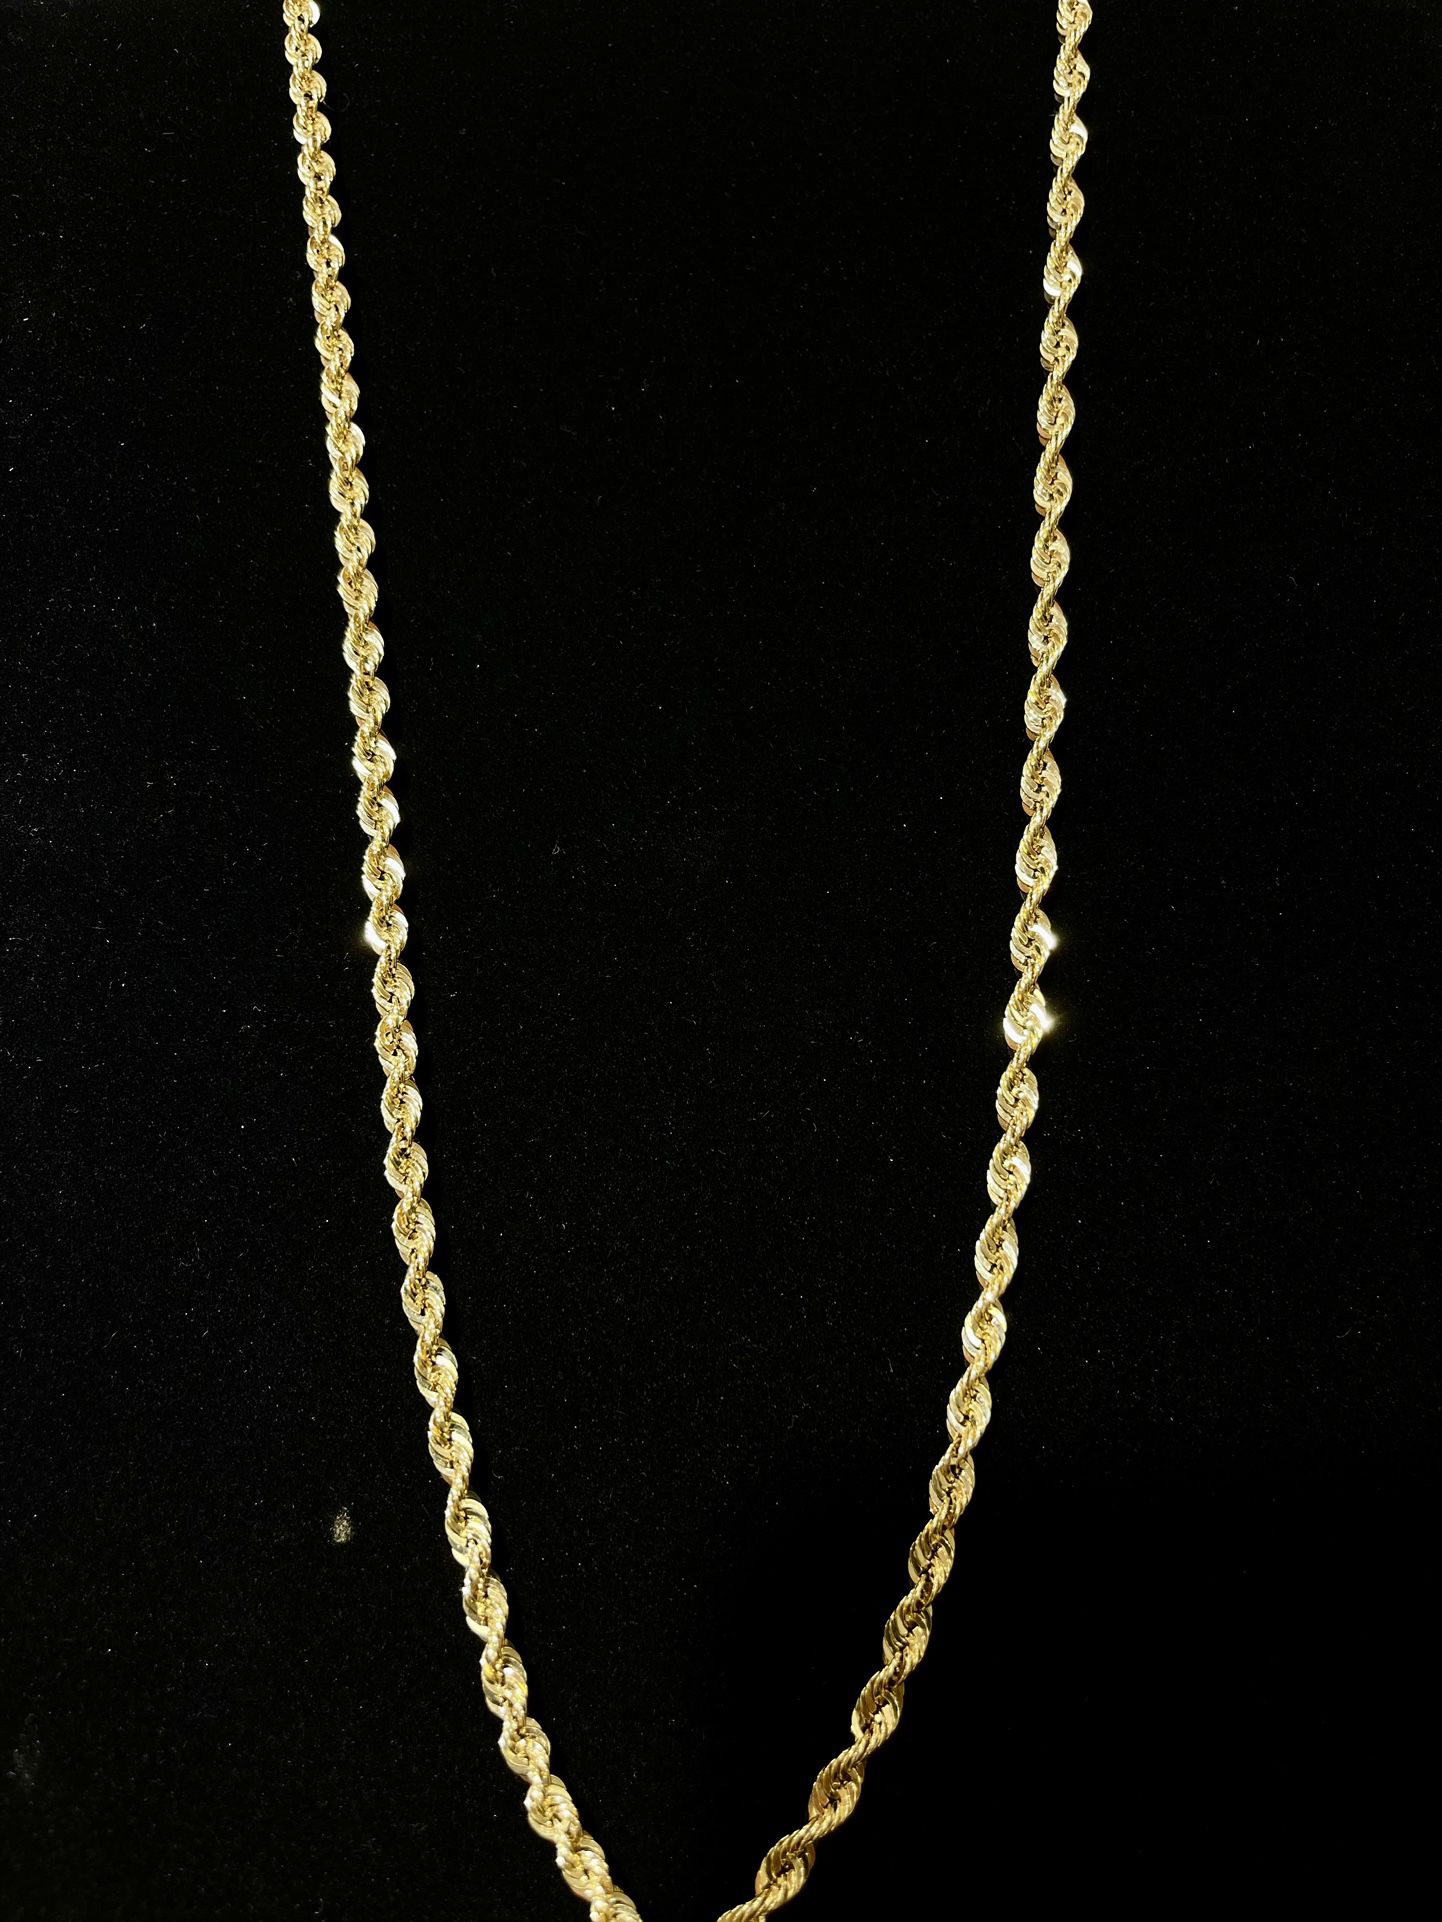 Luxury Rope Chain W/charm Sold Separately 